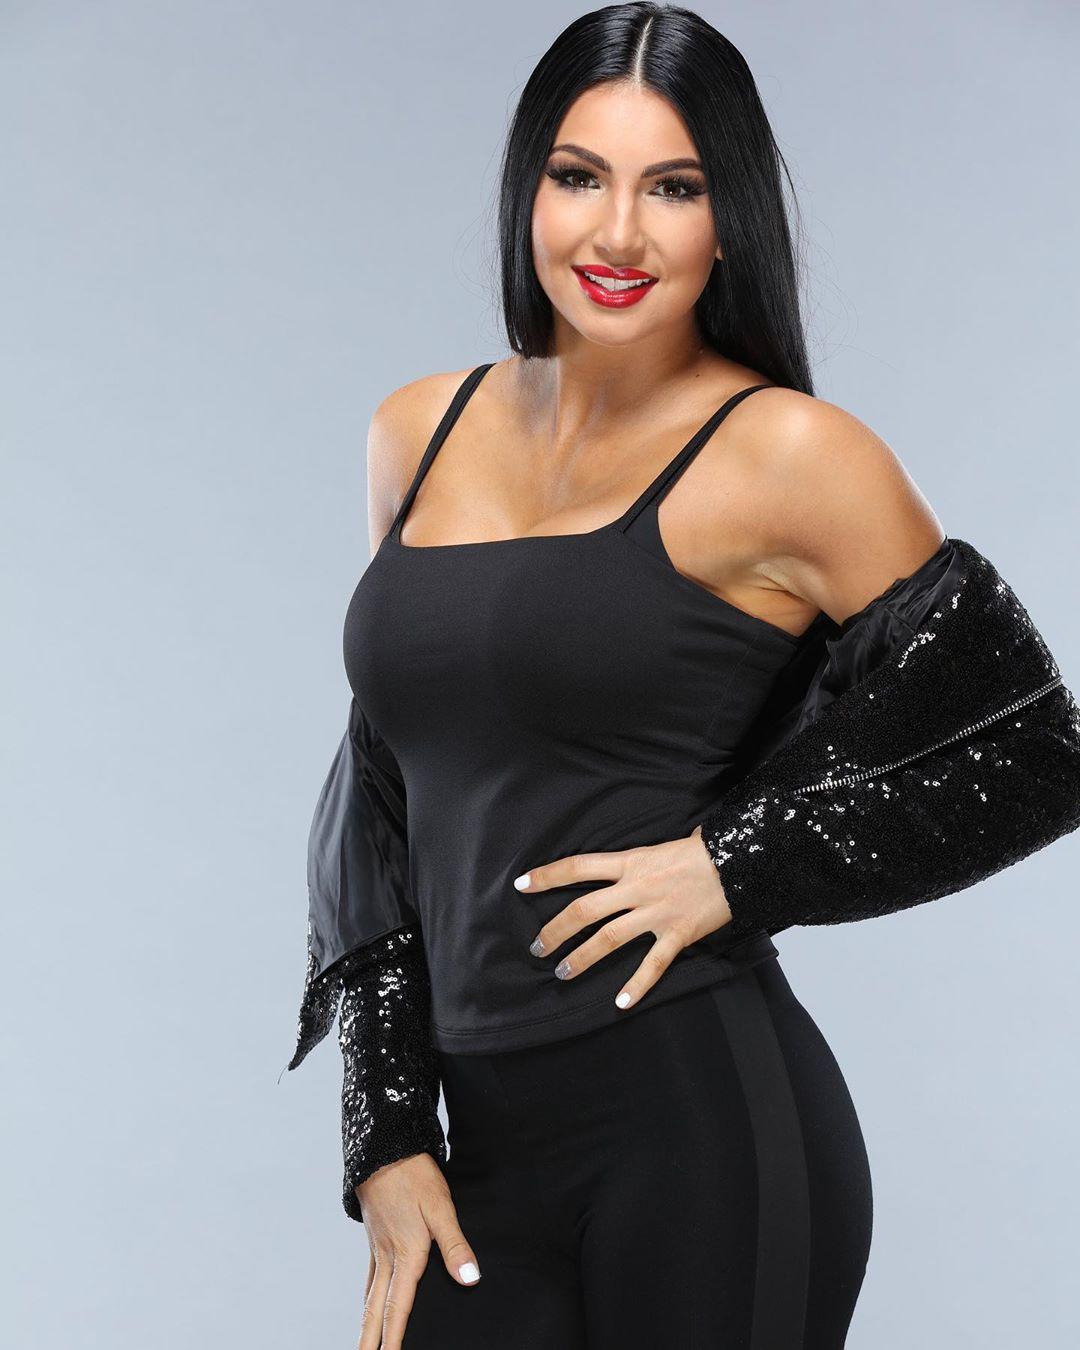 60+ Hot Pictures Of Billie Kay Will Rock The WWE Fan Inside You 388